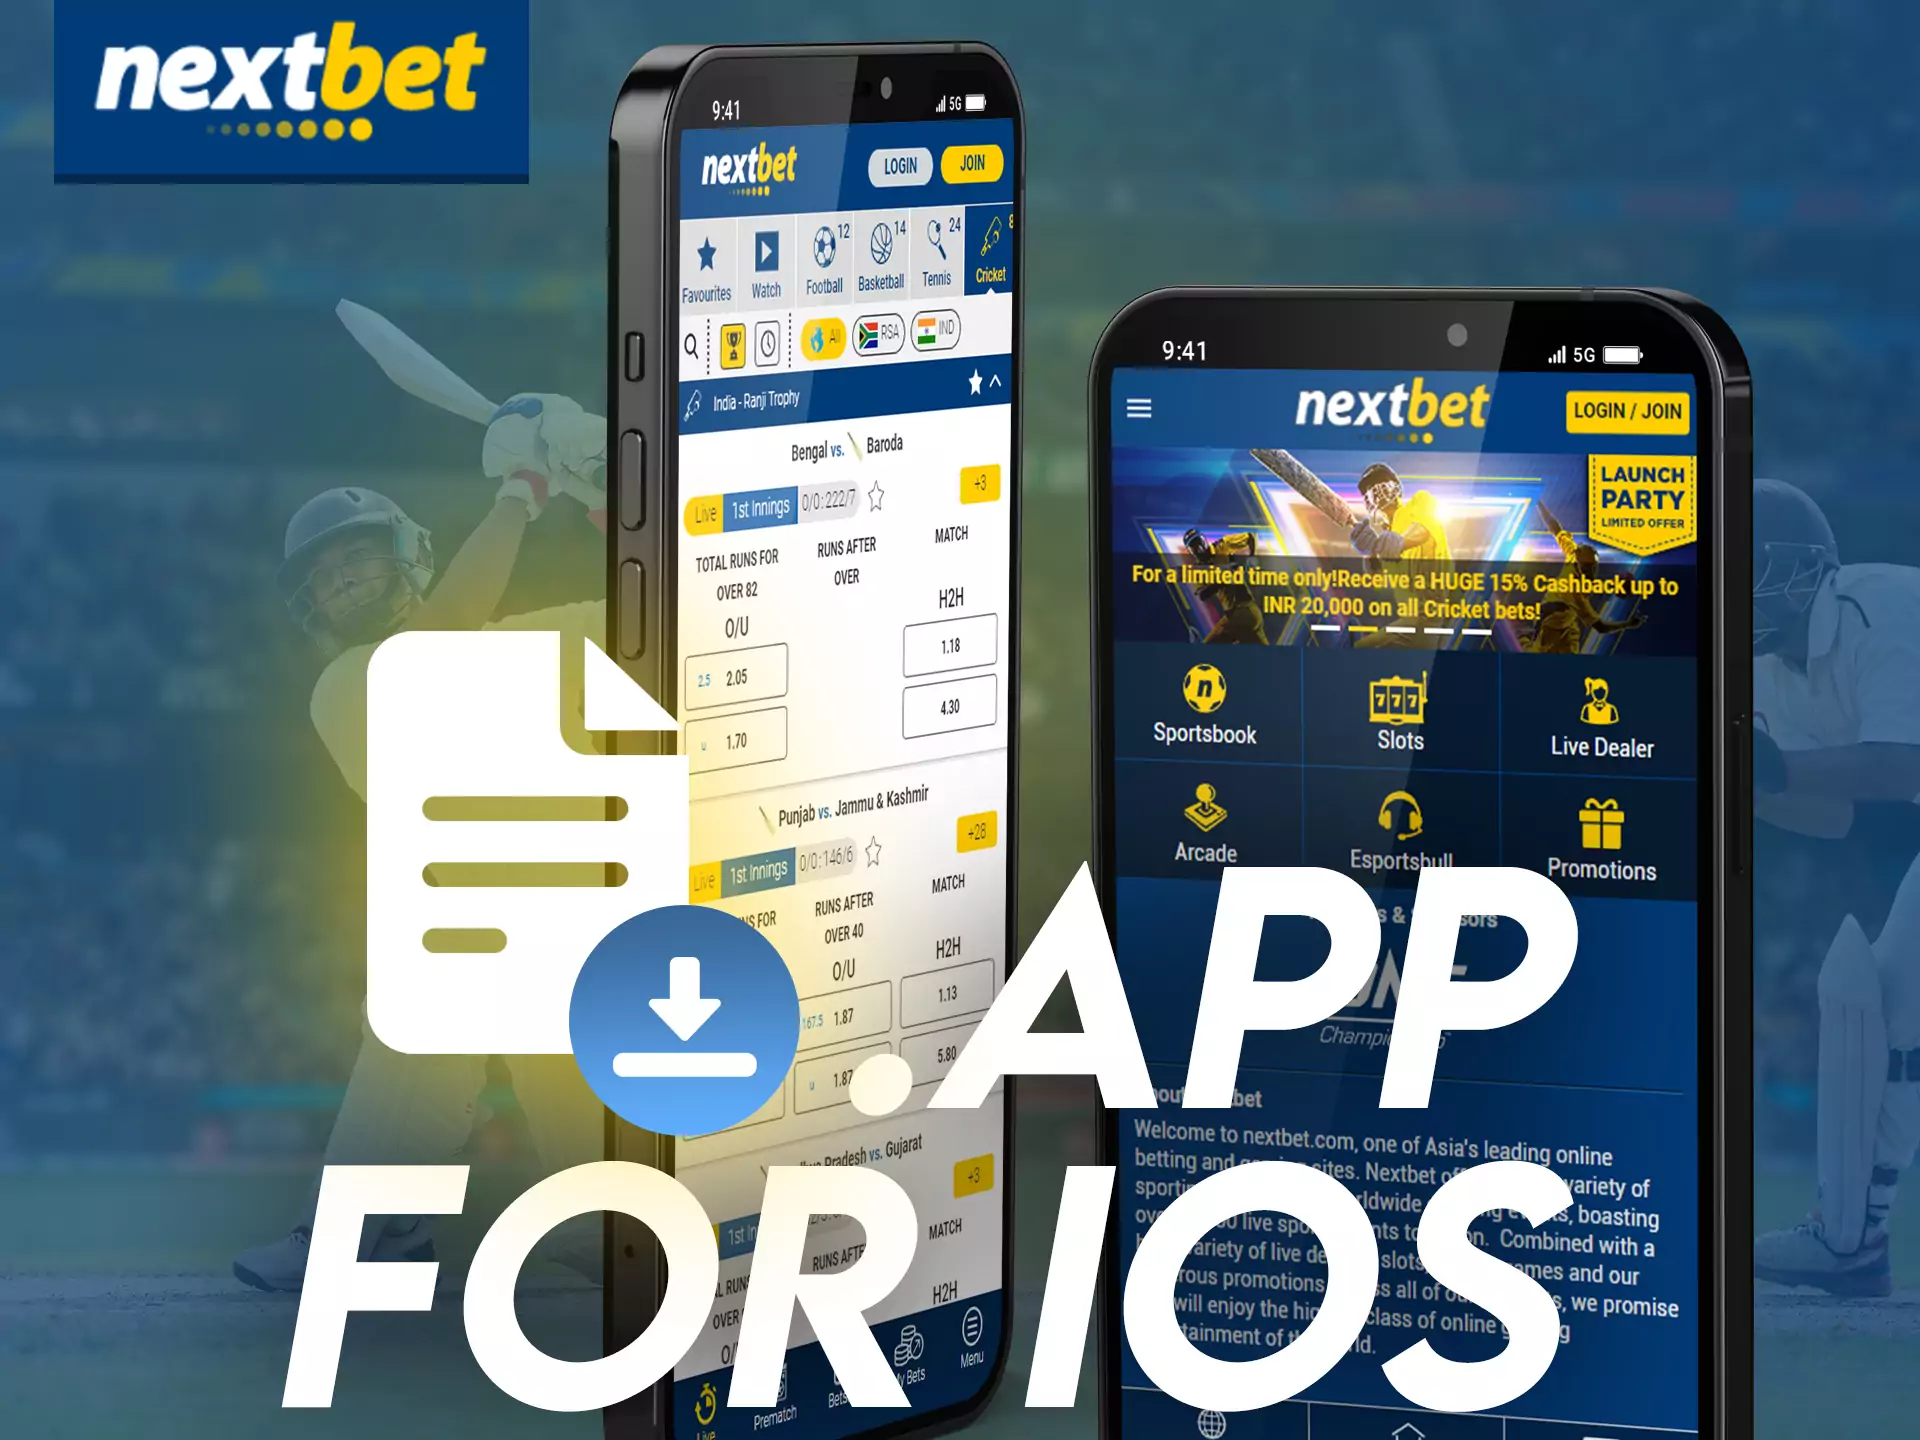 Download the Nextbet app and install it on your iOS device.